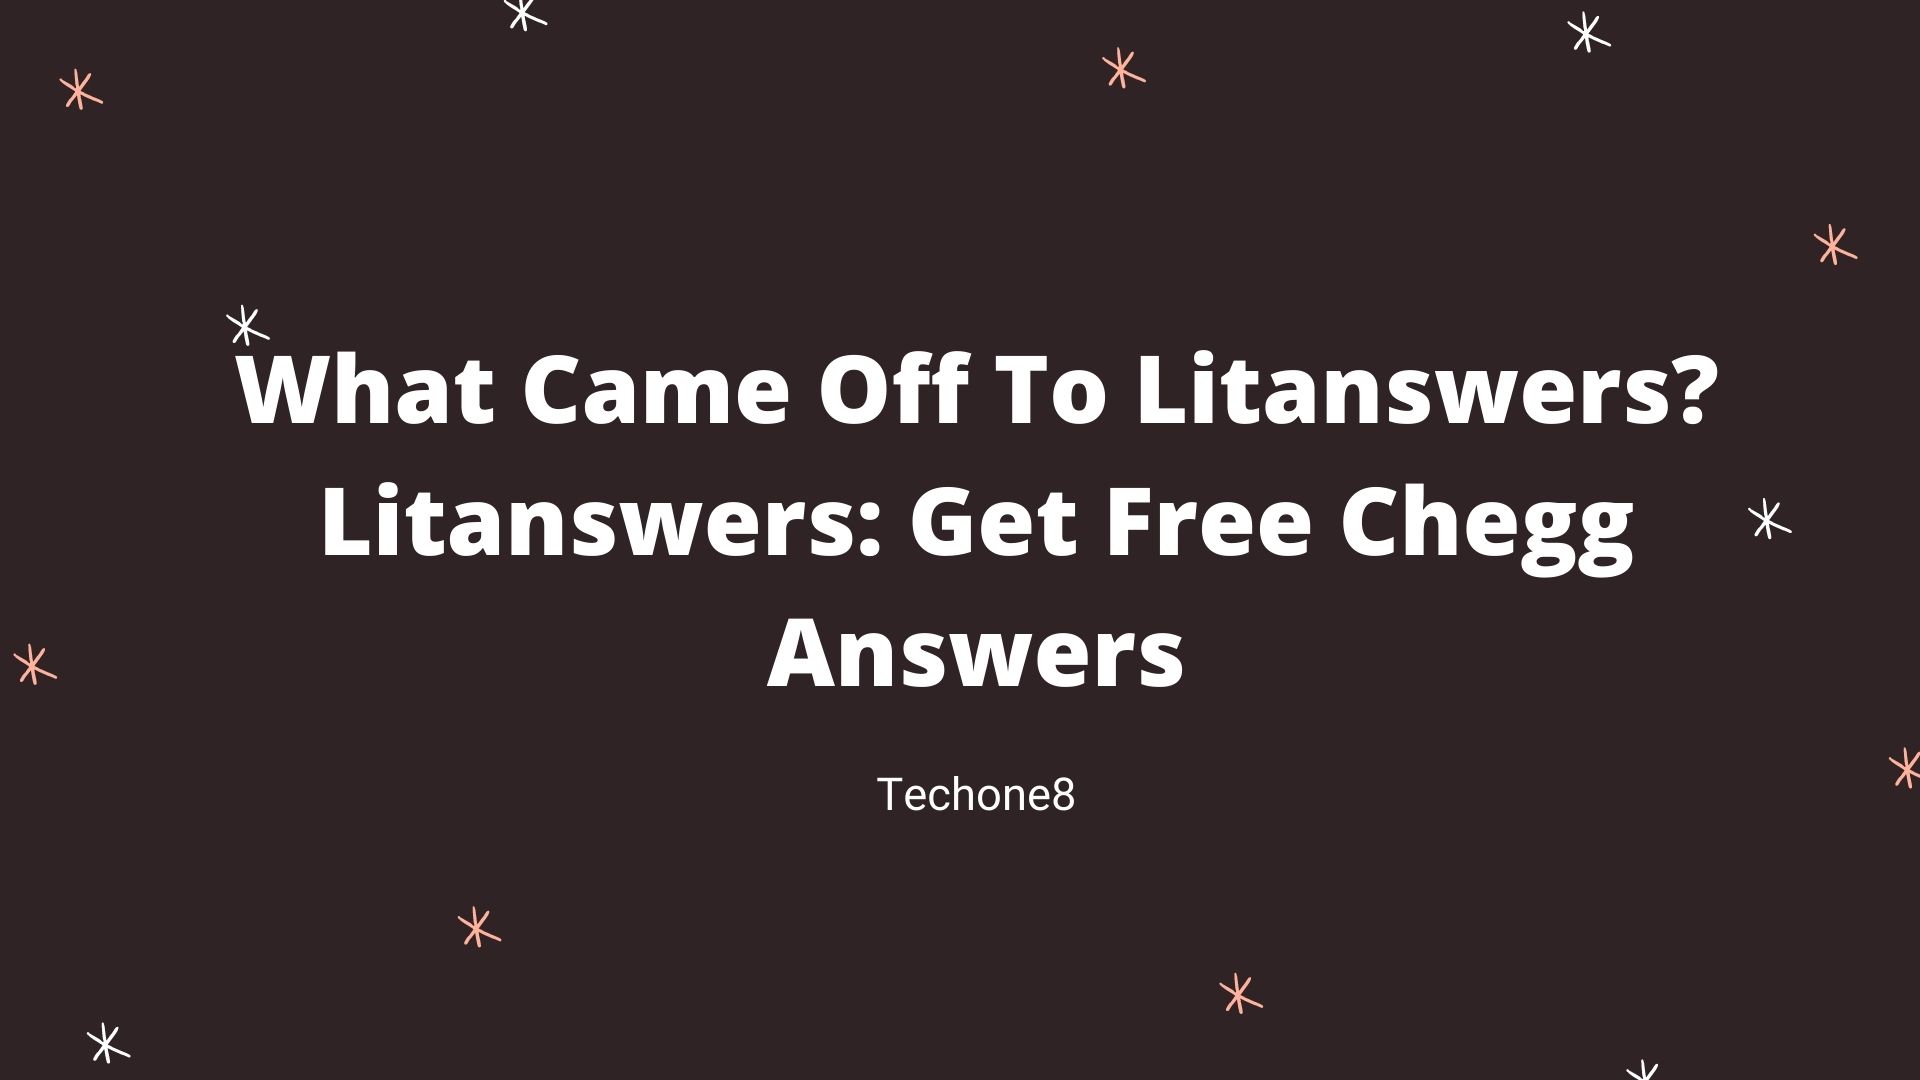 What Came Off To Litanswers? Litanswers: Get Free Chegg Answers